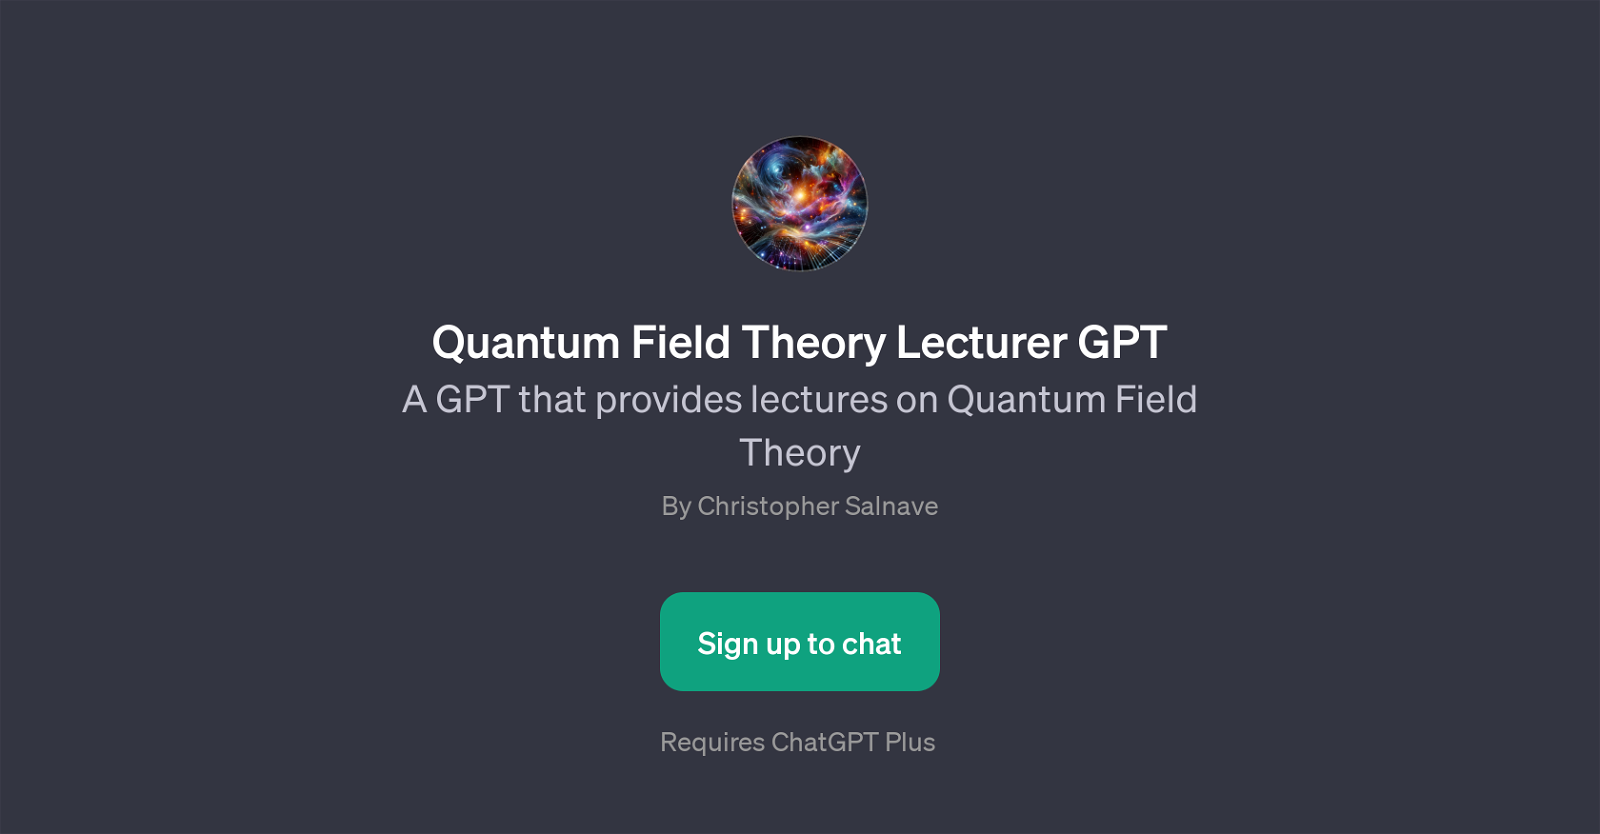 Quantum Field Theory Lecturer GPT website